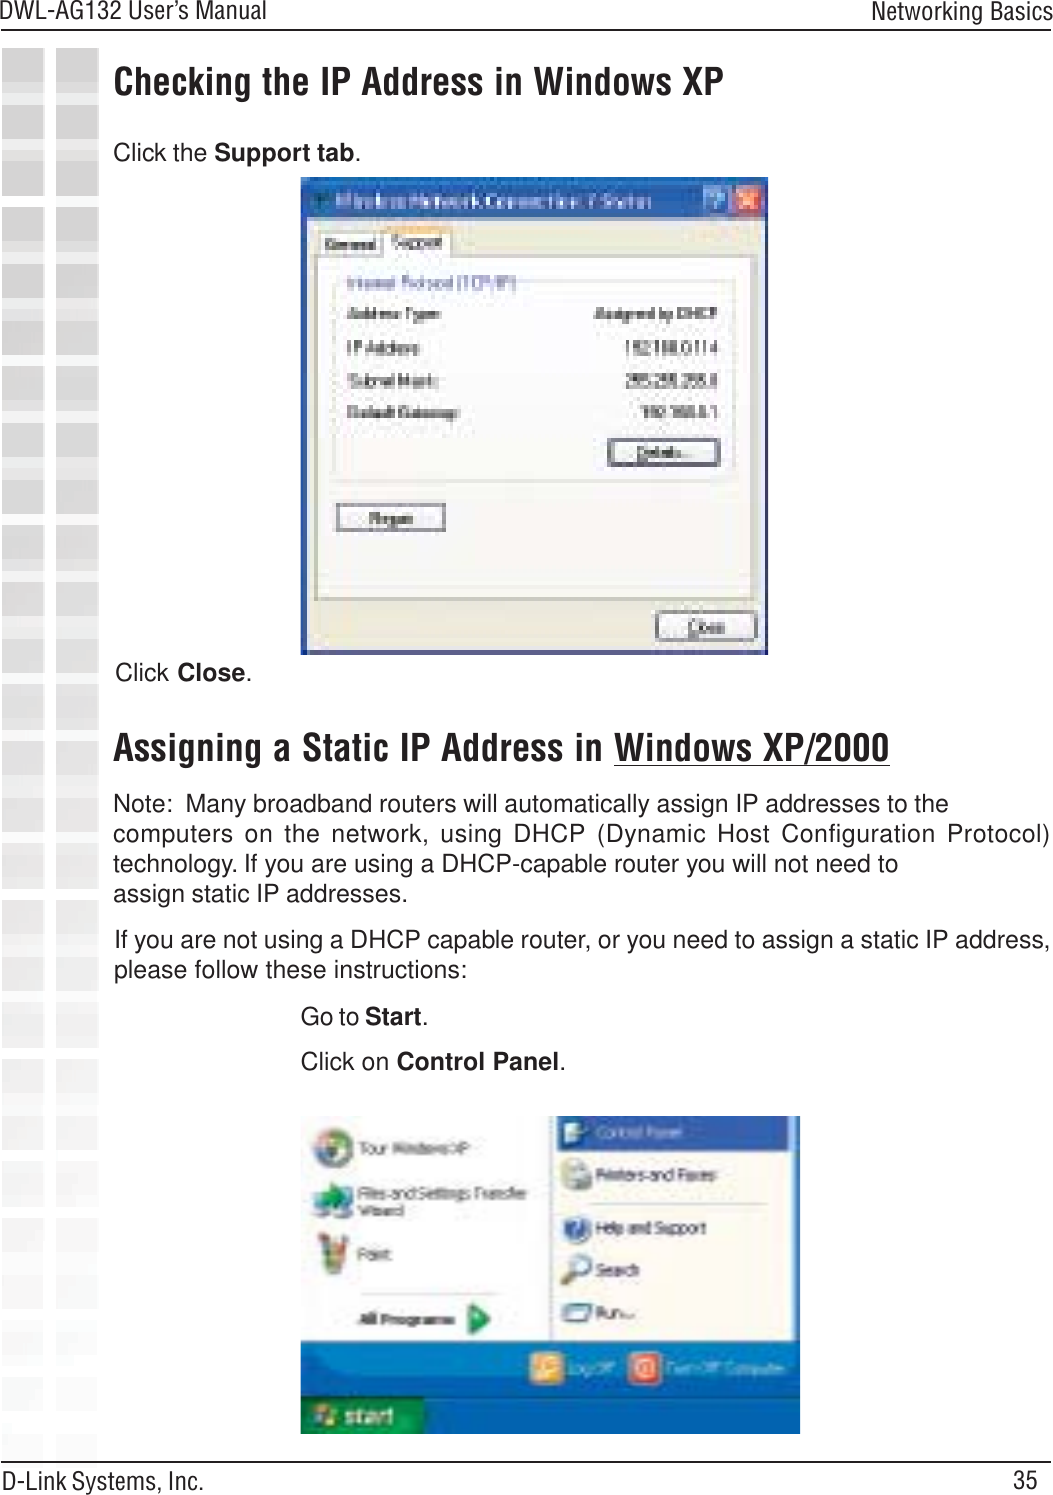 35DWL-AG132 User’s ManualD-Link Systems, Inc.Click the Support tab.Click Close.Assigning a Static IP Address in Windows XP/2000Note:  Many broadband routers will automatically assign IP addresses to thecomputers on the network, using DHCP (Dynamic Host Configuration Protocol)technology. If you are using a DHCP-capable router you will not need toassign static IP addresses.If you are not using a DHCP capable router, or you need to assign a static IP address,please follow these instructions:Go to Start.Click on Control Panel.Checking the IP Address in Windows XPNetworking Basics